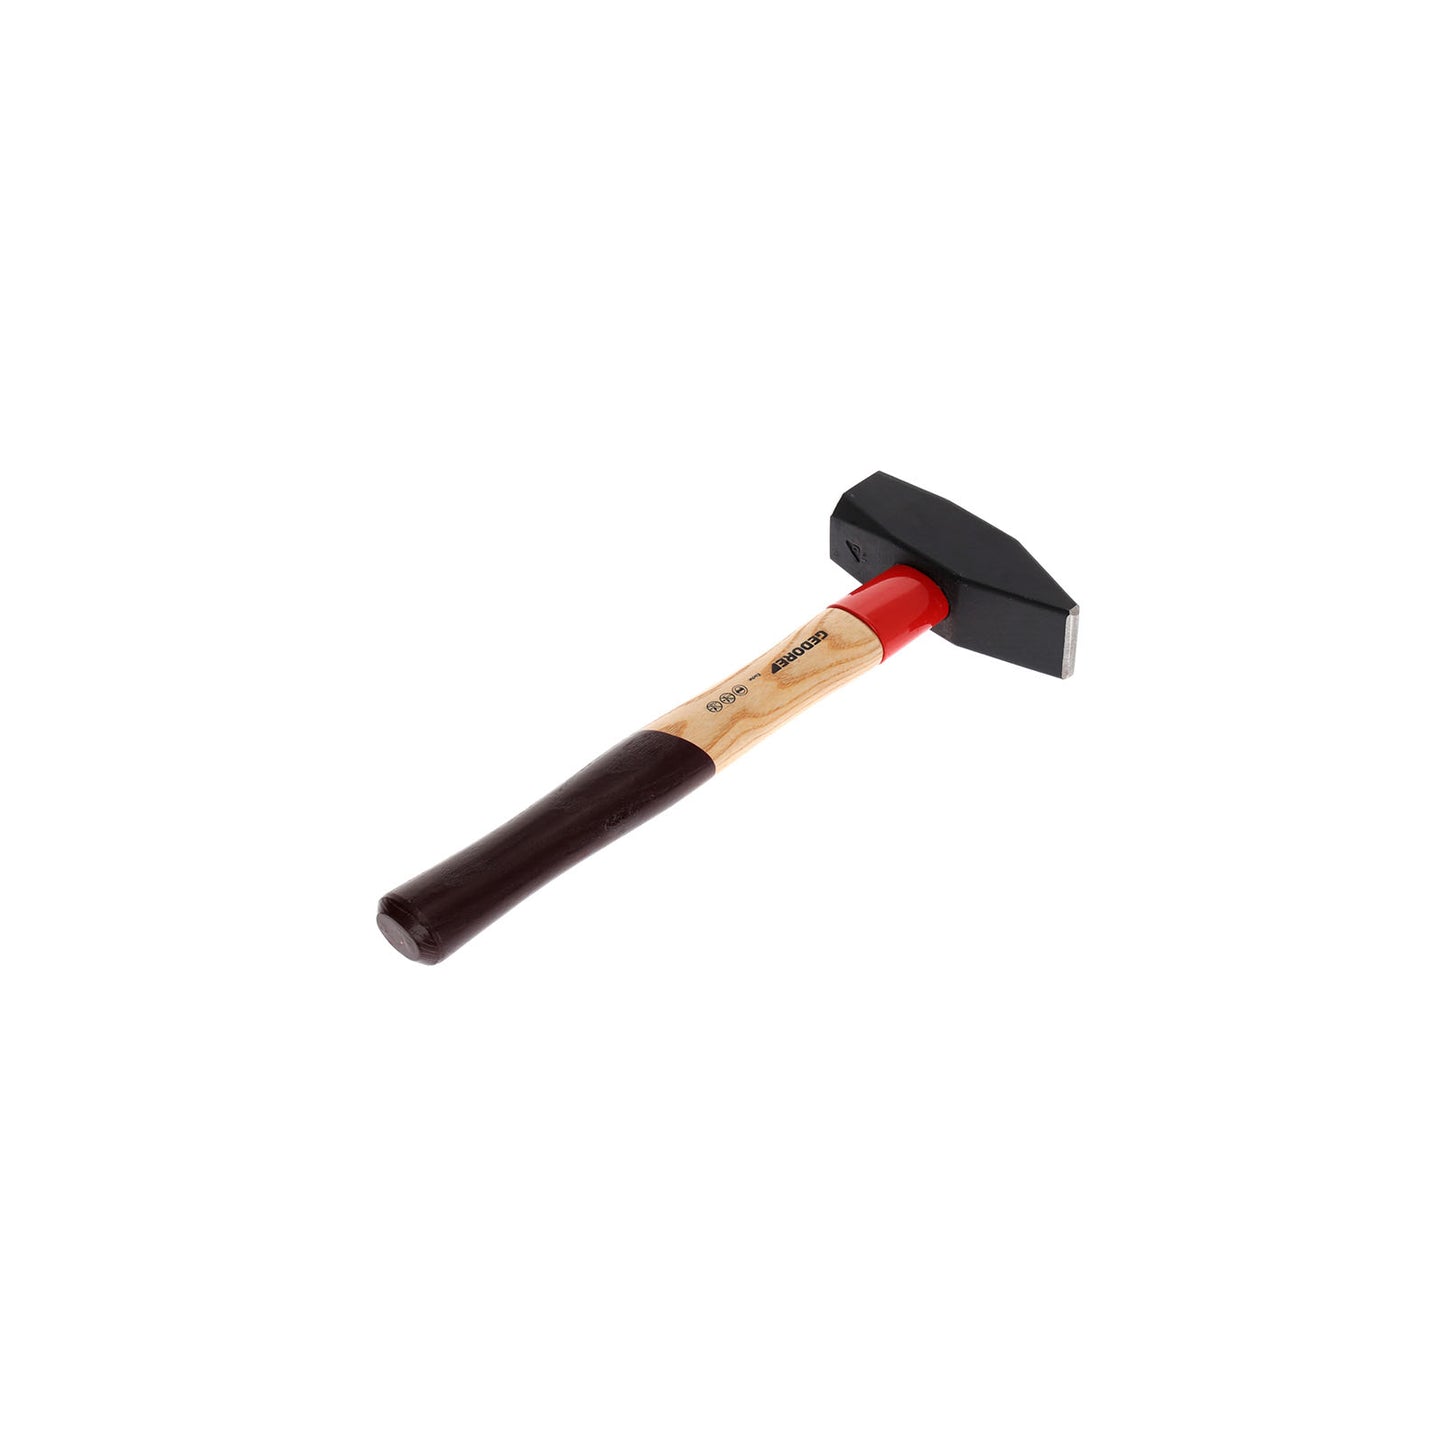 GEDORE 600 E-2000 - ROTBAND assembly hammer 2kg (8582770)